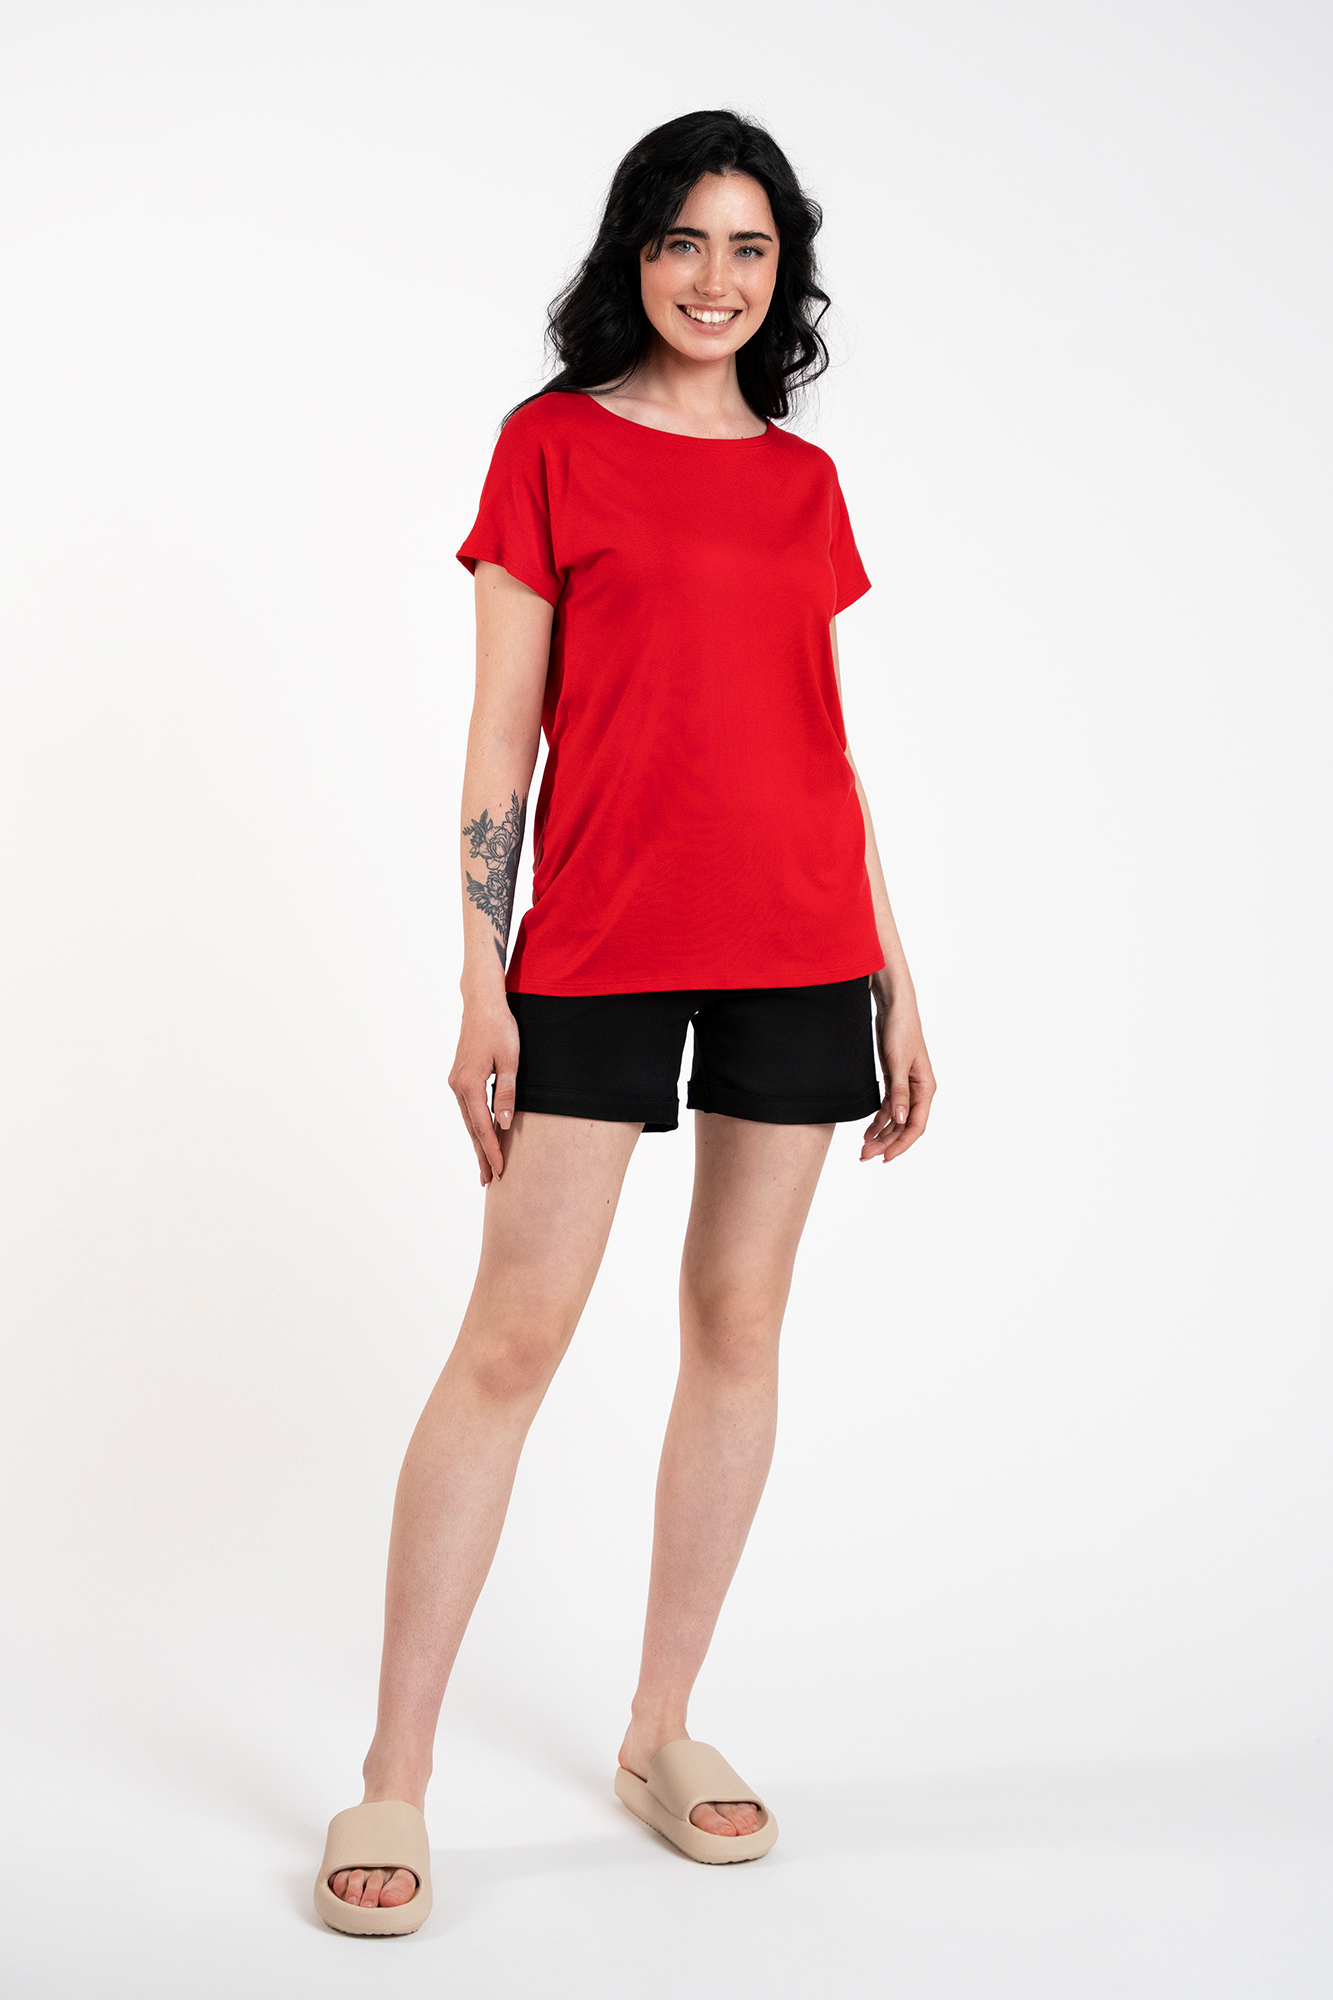 Women's blouse Ksenia with short sleeves - red